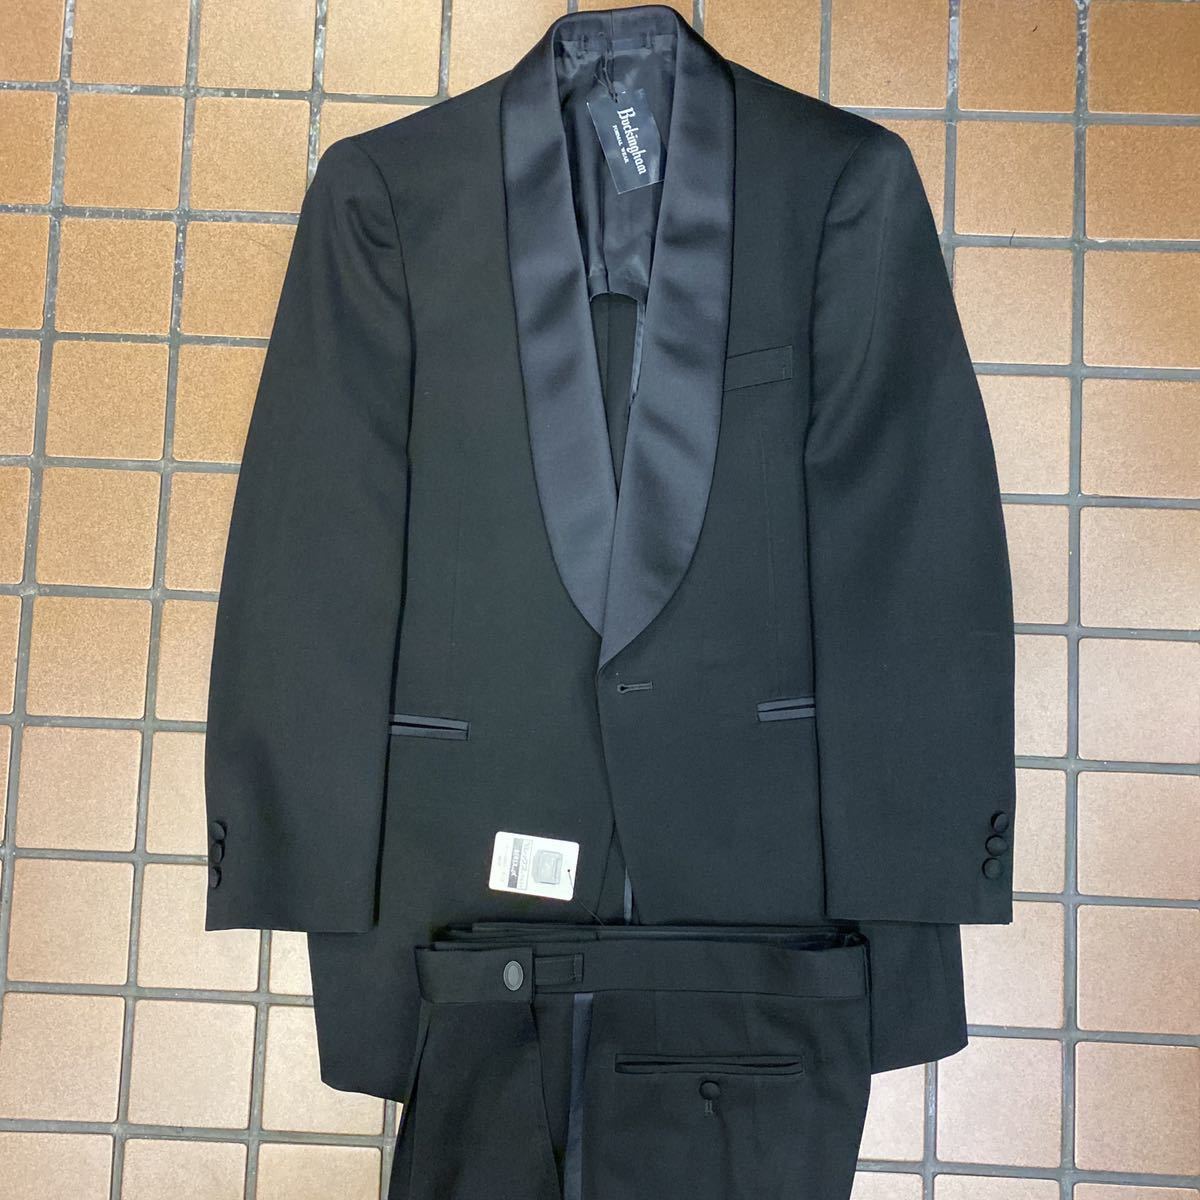  new goods super-discount tag attaching high class BUCKINGHAM shawl color tuxedo formal setup size AB5 made in Japan wool 100% adjuster attaching 